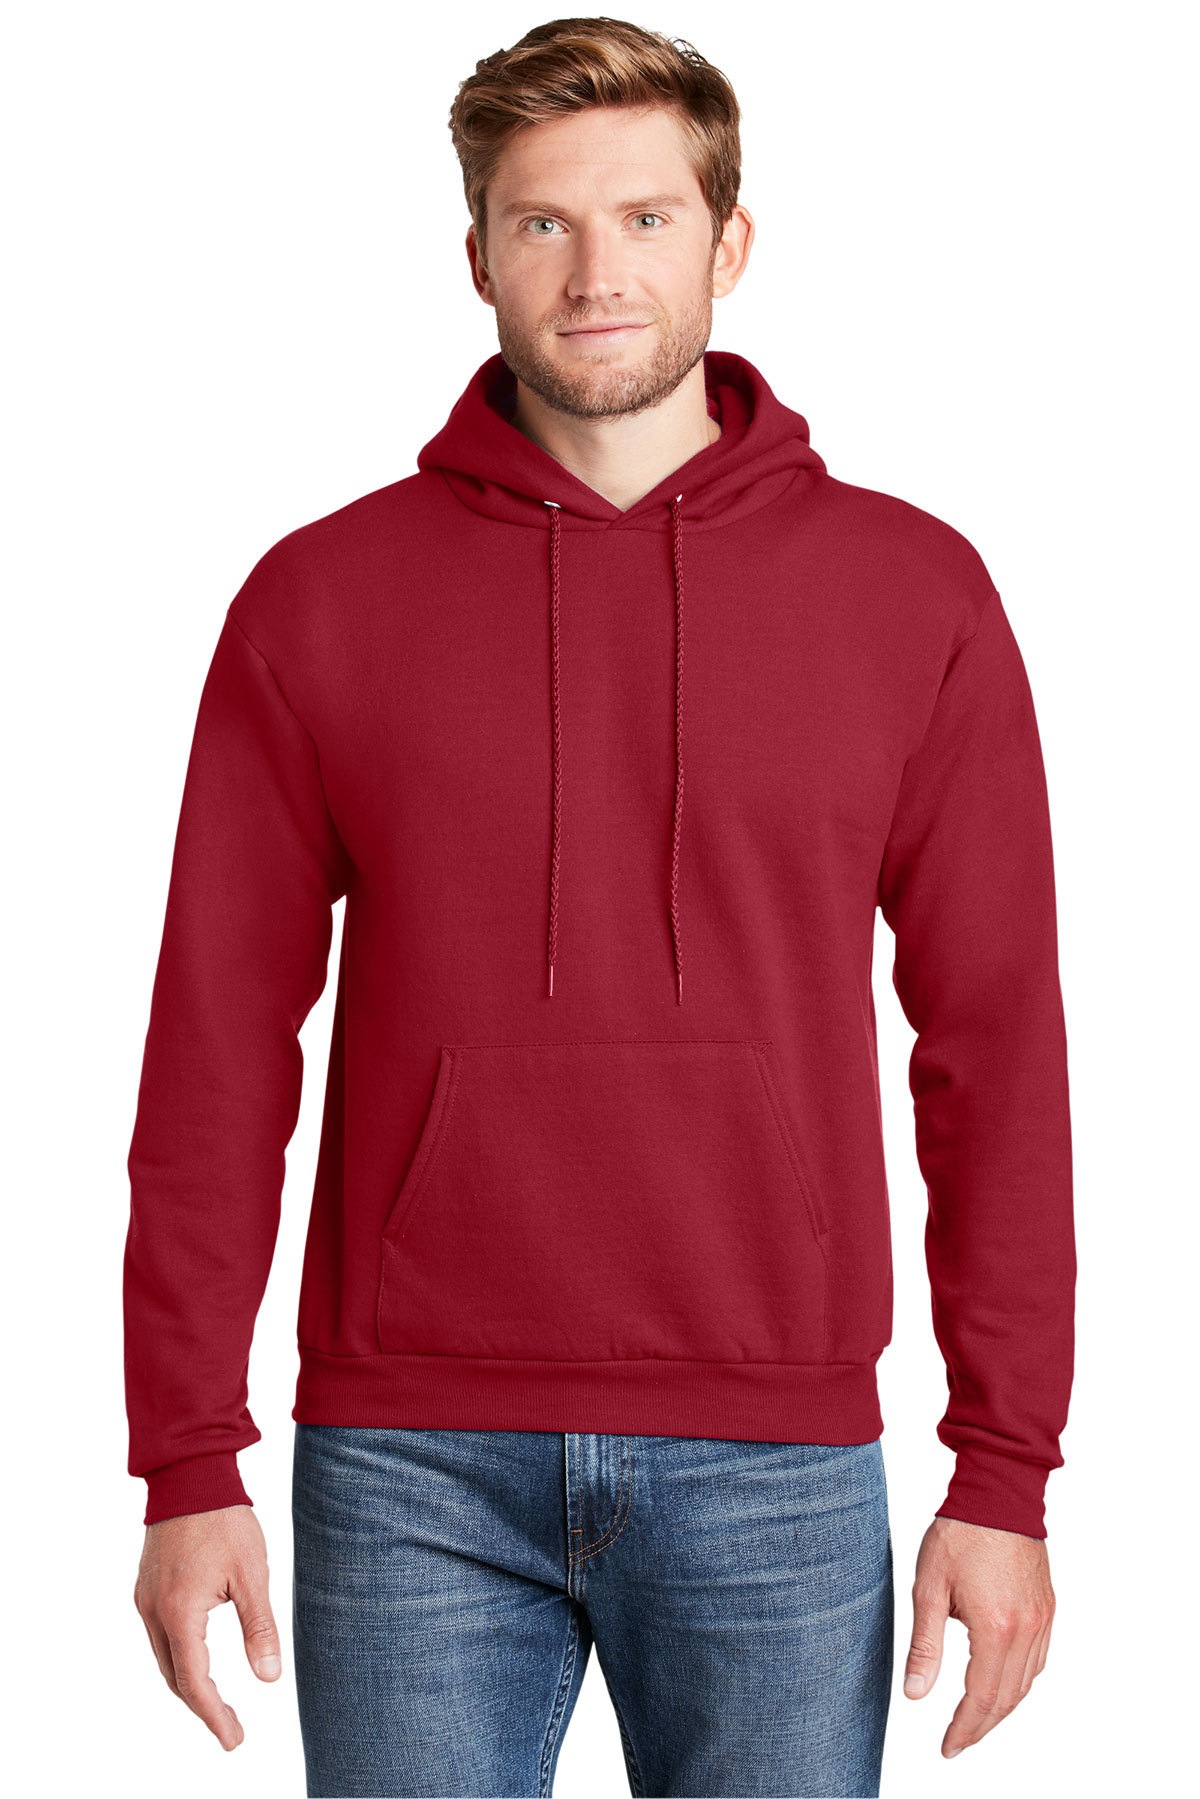 Mens Hanes Hoodies, Customized With Your Logo!